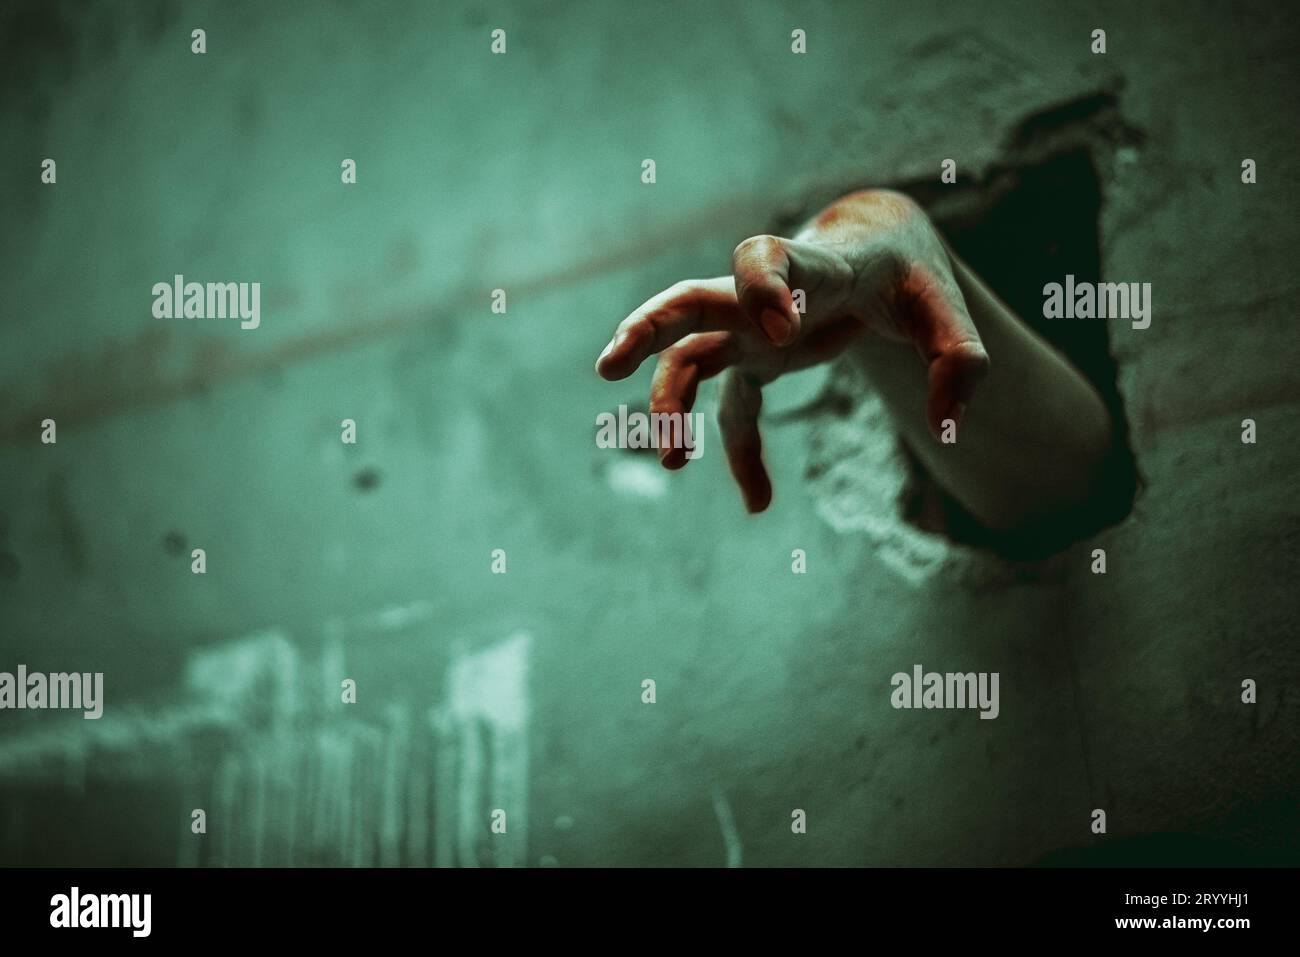 Zombie hand through the cracked wall. Horror and scary film concept. Halloween day theme. Green tone like ghost movie Stock Photo